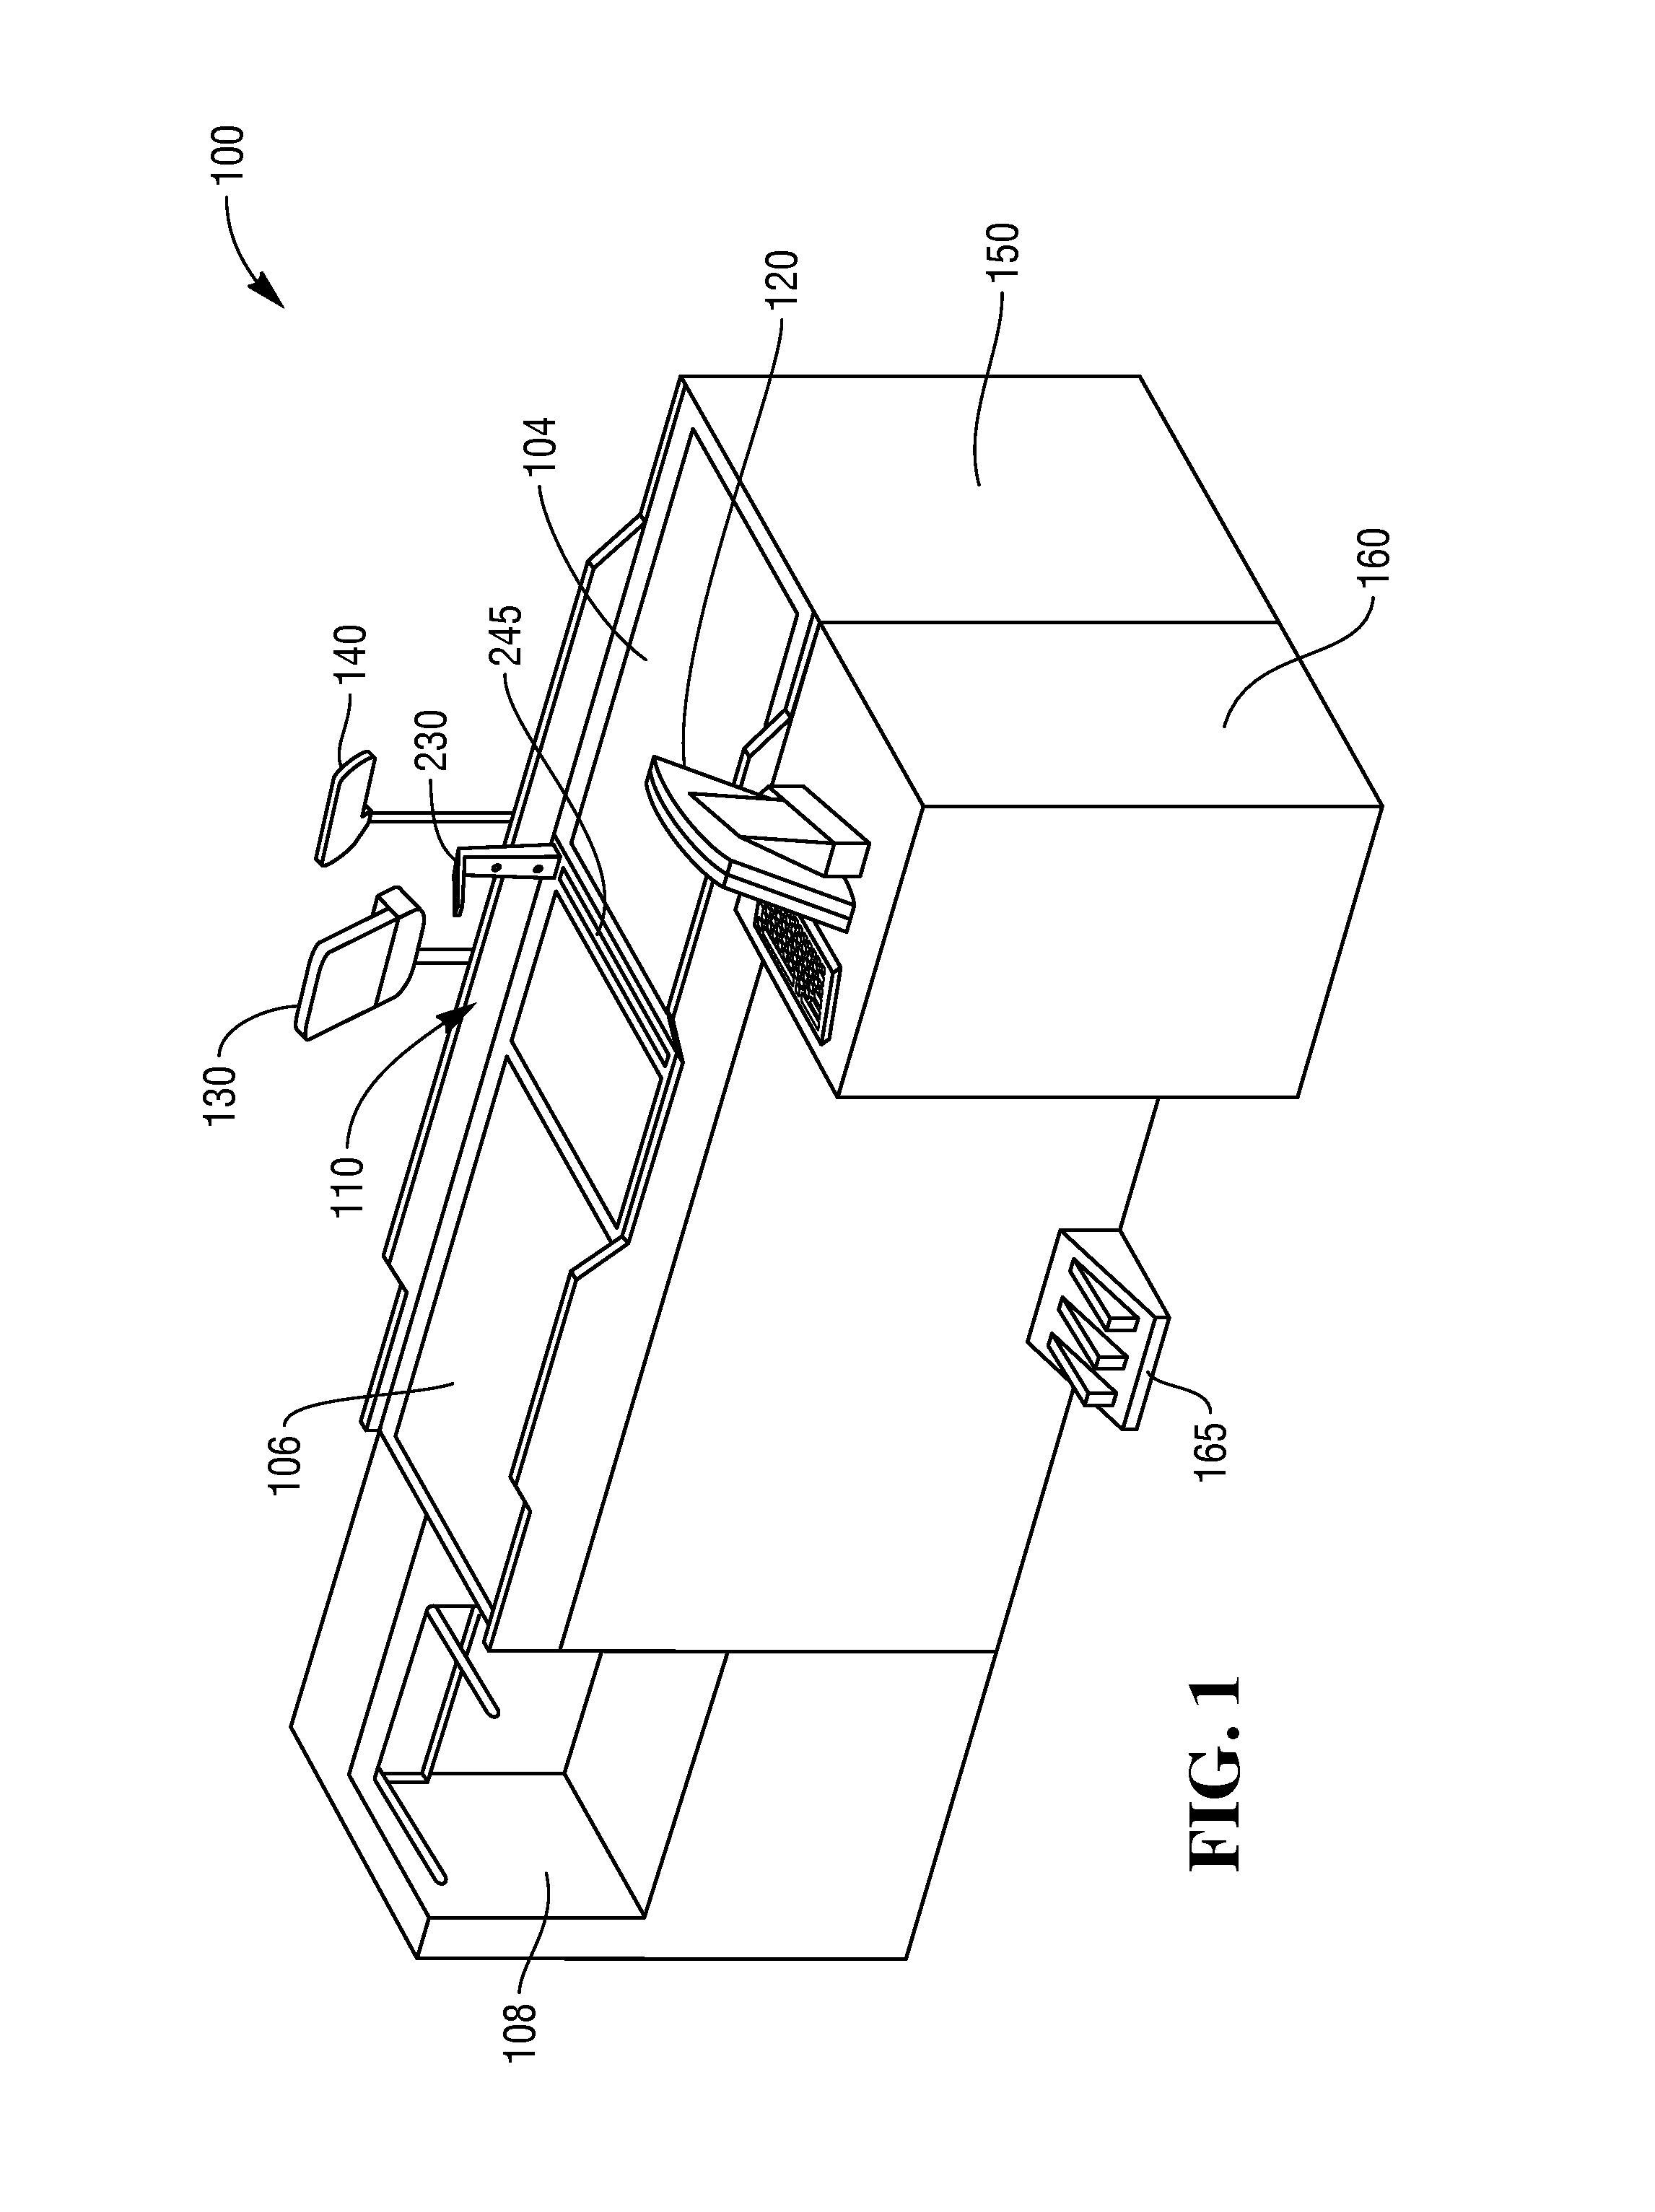 Method, Apparatus and System for Scanning an Optical Code